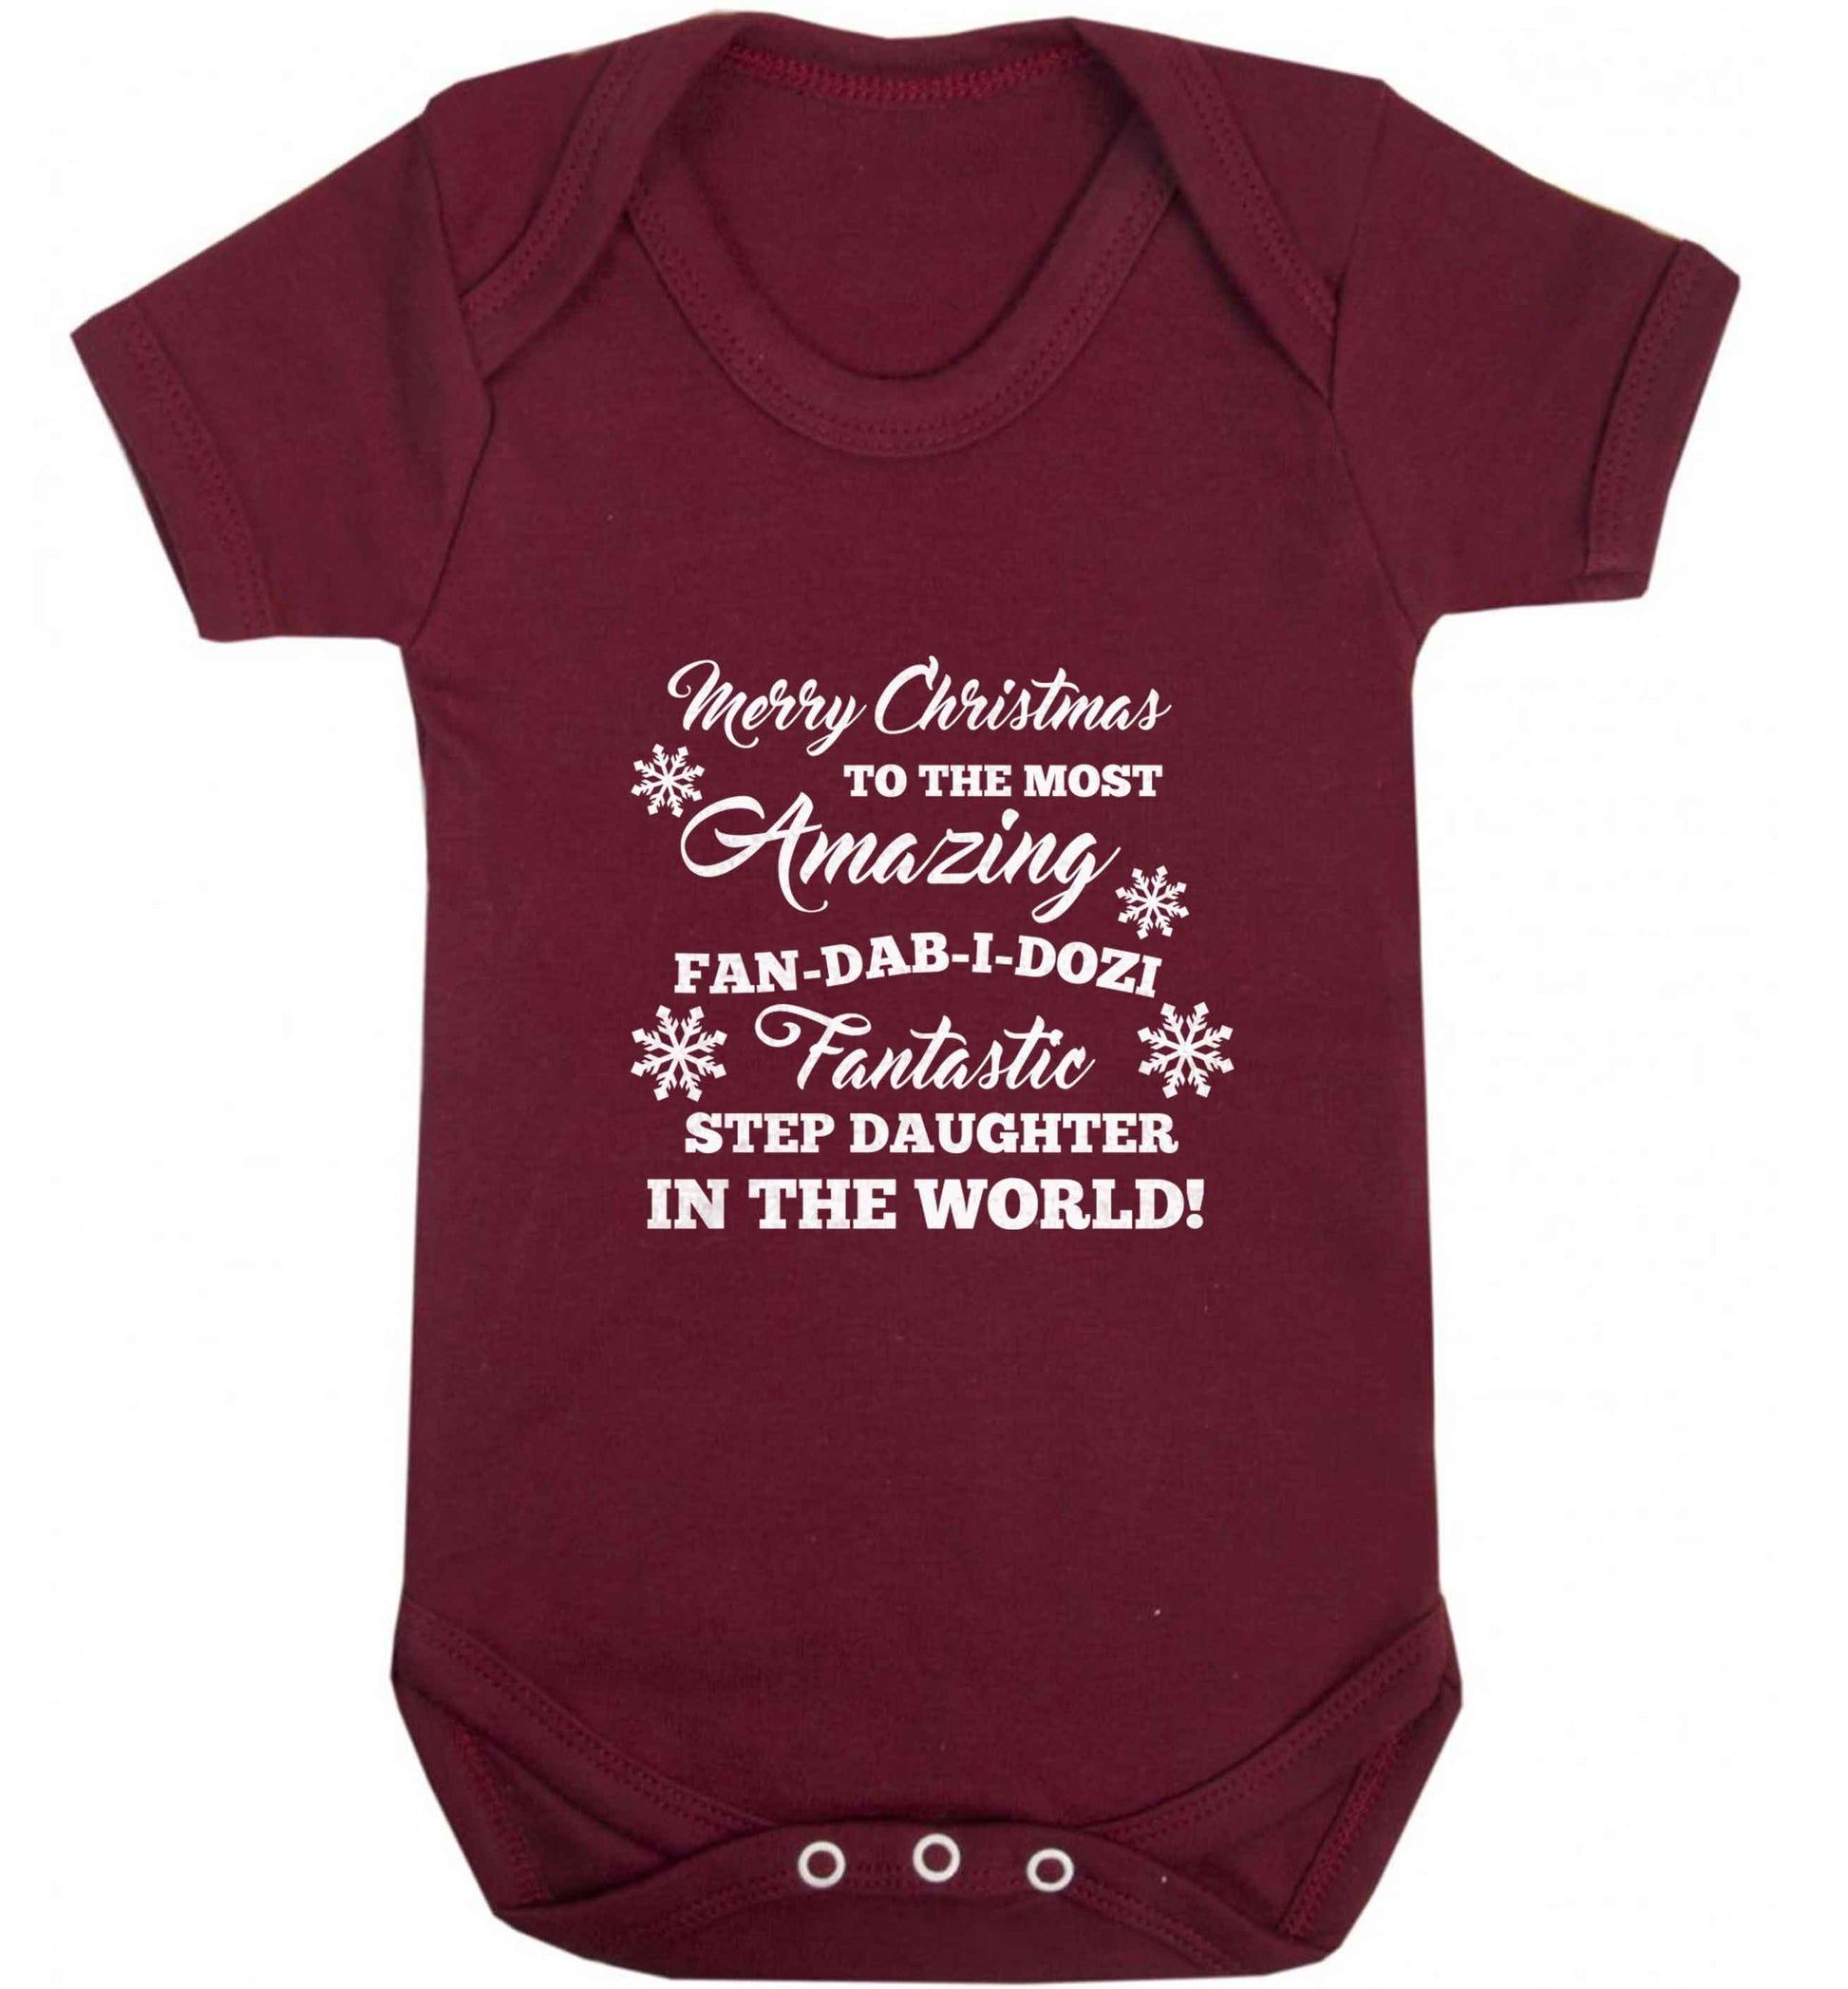 Merry Christmas to the most amazing fan-dab-i-dozi fantasic Step Daughter in the world baby vest maroon 18-24 months